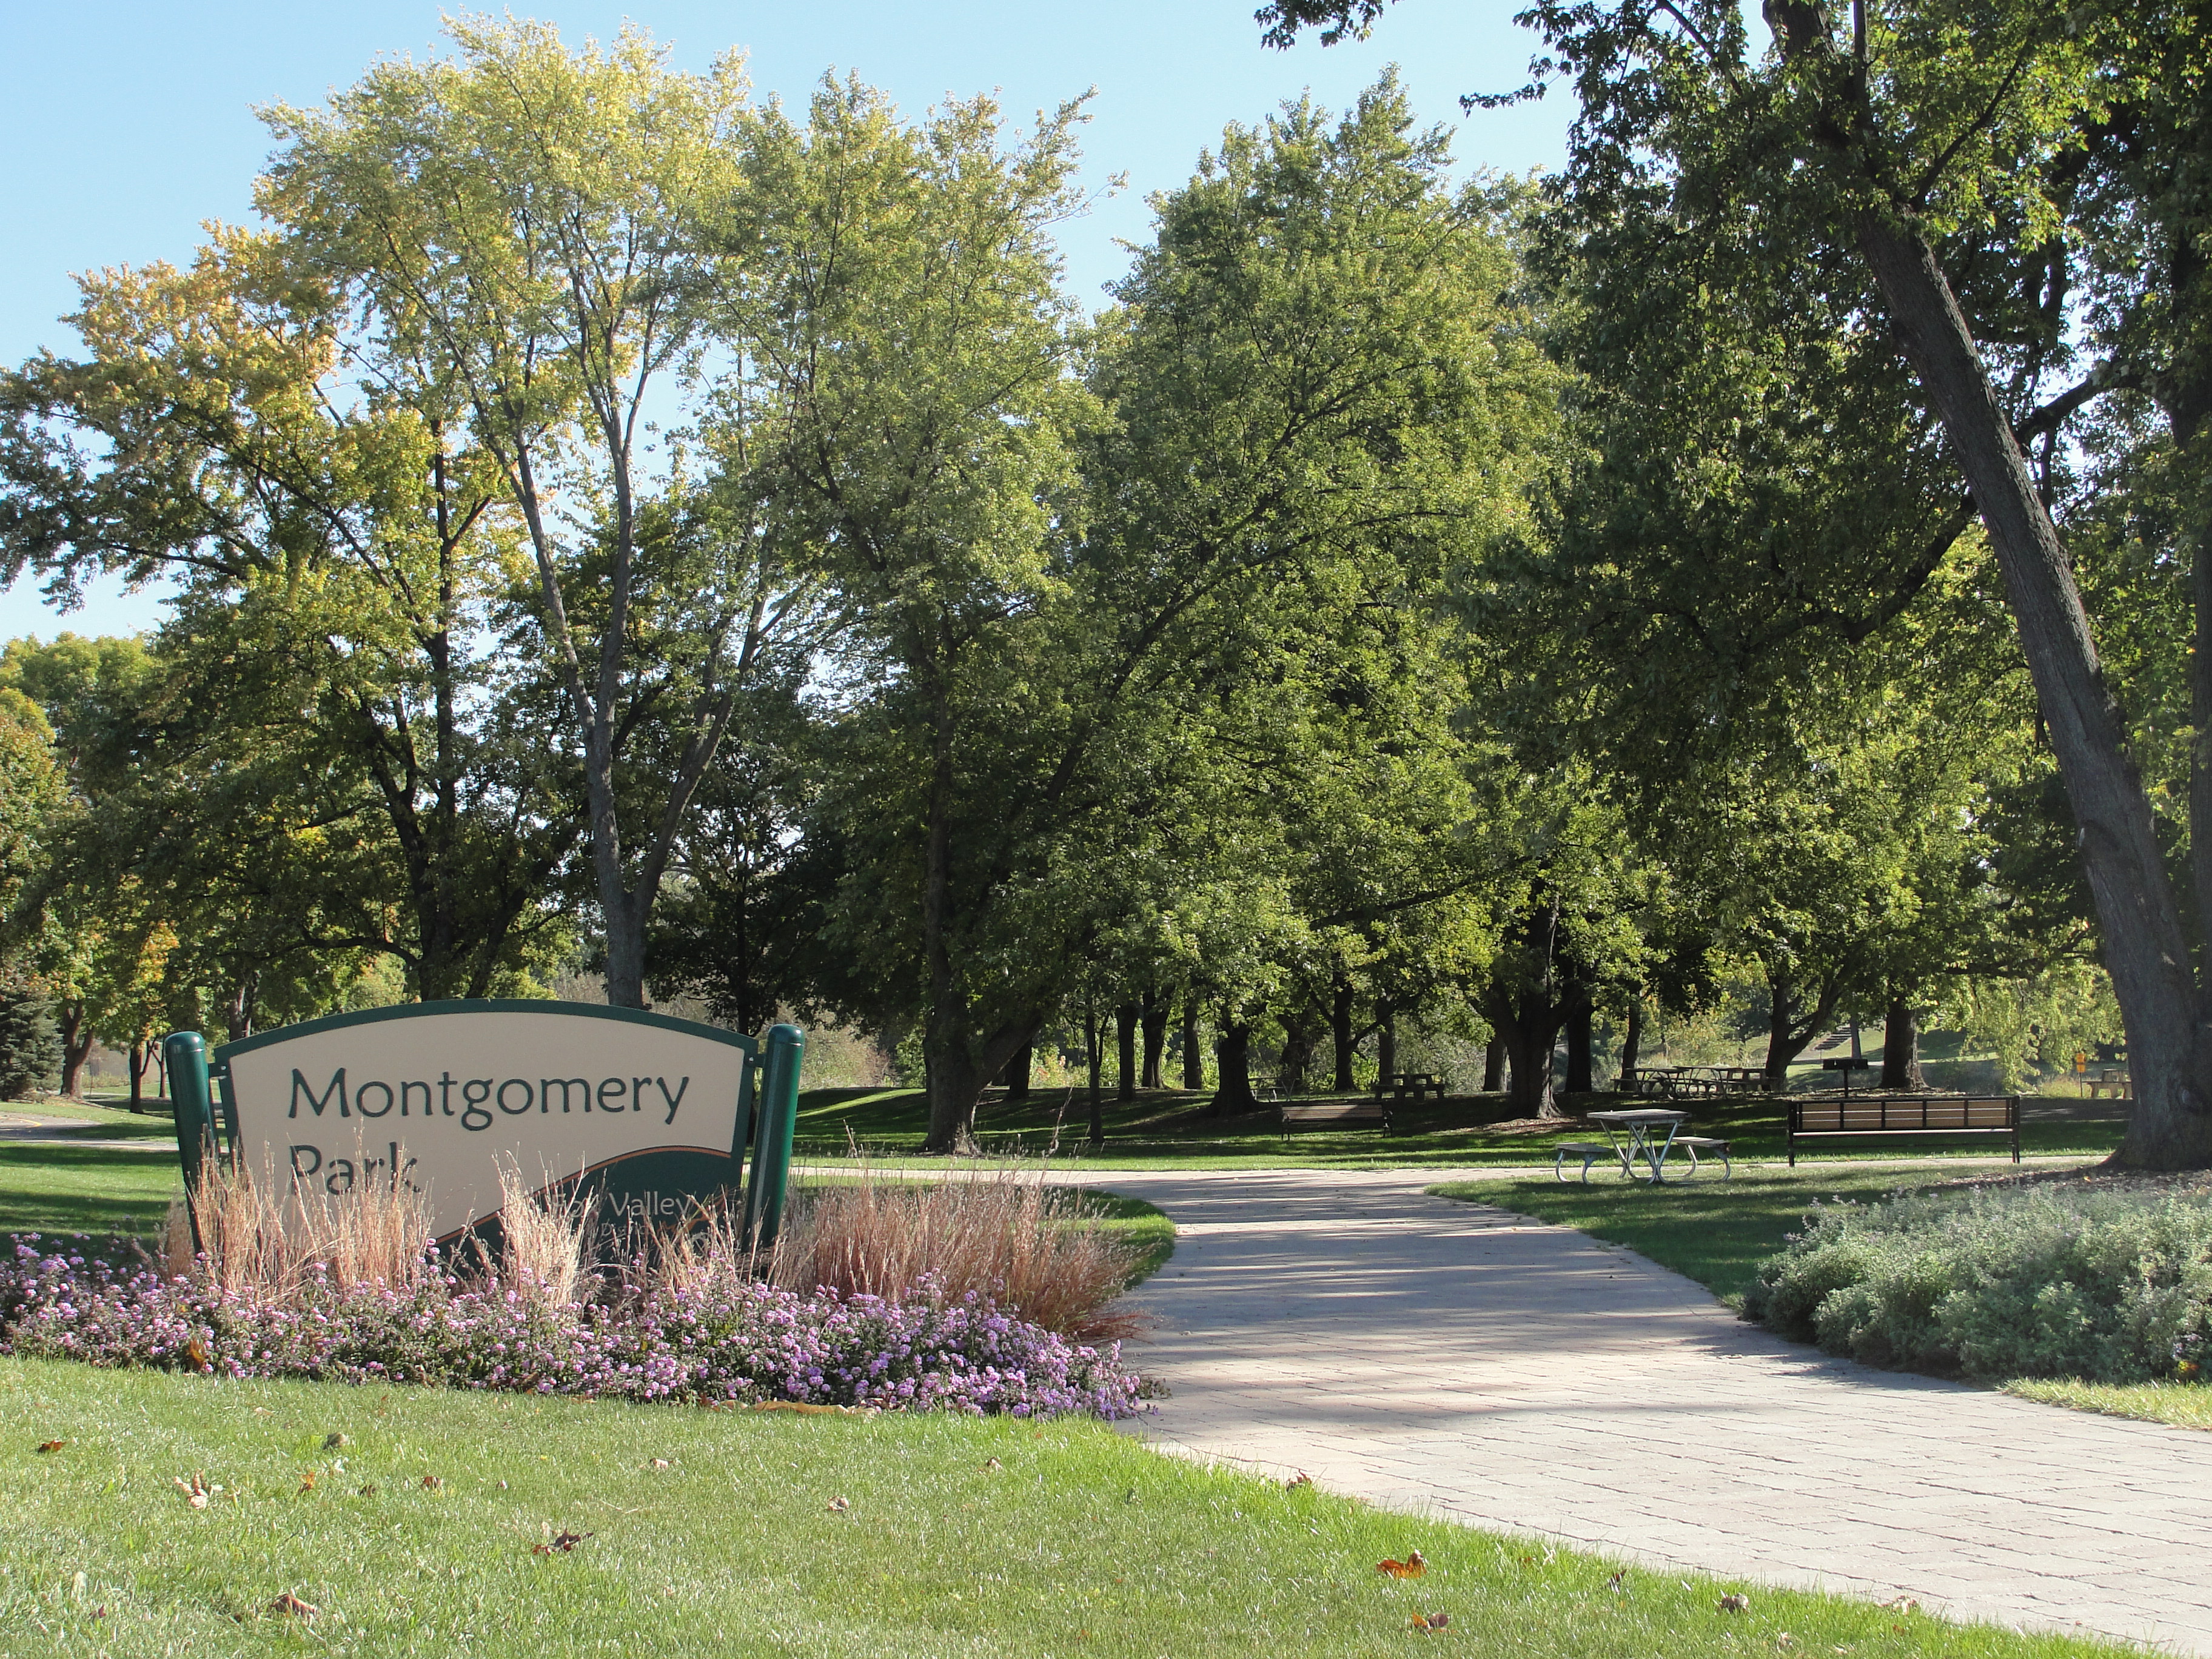 File:Montgomery Park south entrance.JPG - Wikimedia Commons